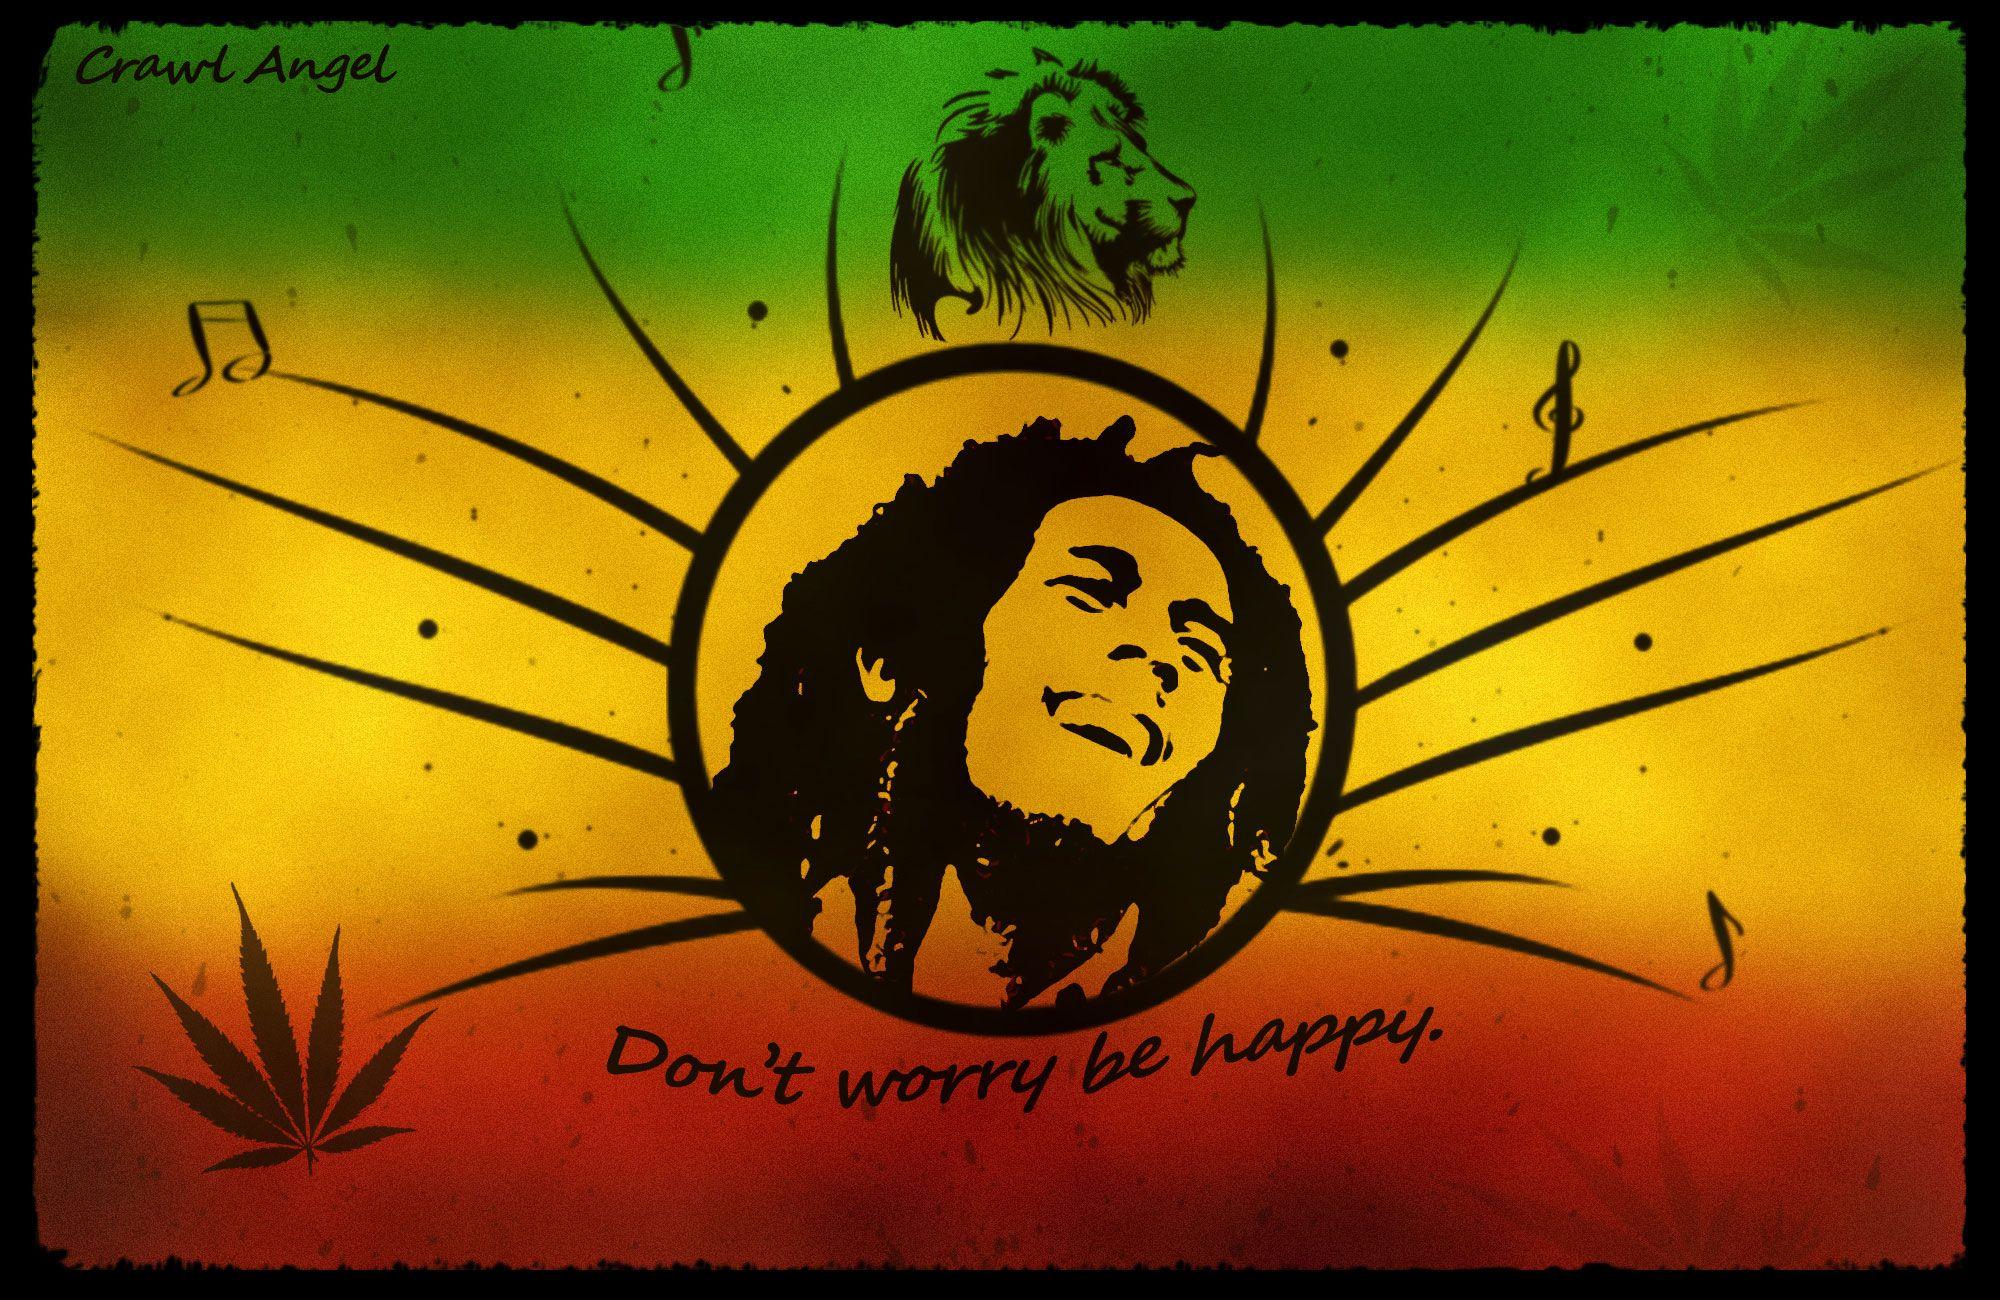 Bob Marley Wallpaper High Resolution and Quality Download